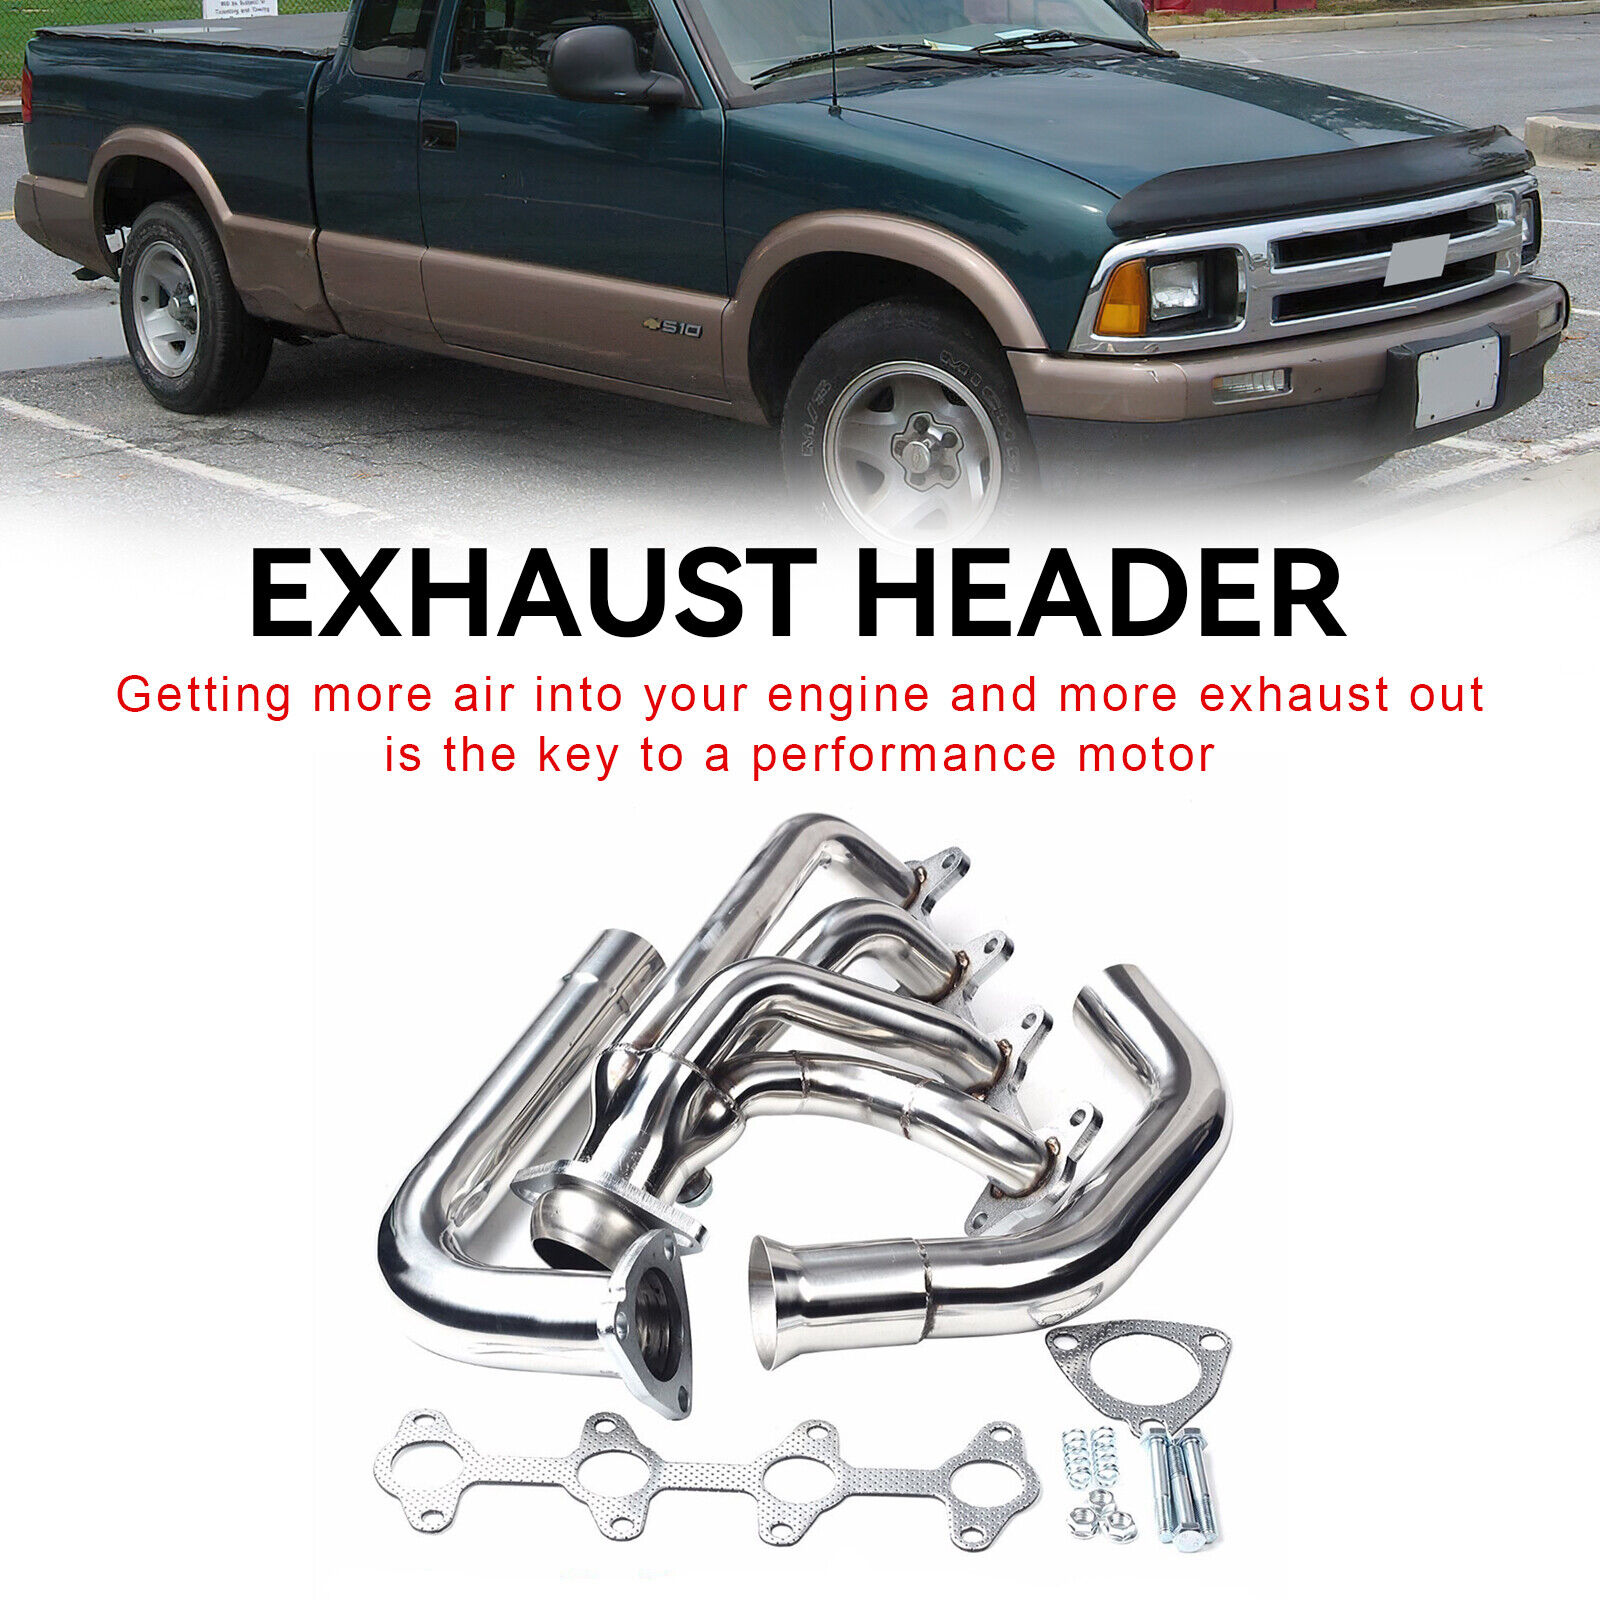 1× Stainless Exhaust Header Kit Fit Chevy S10 94-04 &GMC Sonoma 2.2L 2WD Pickup